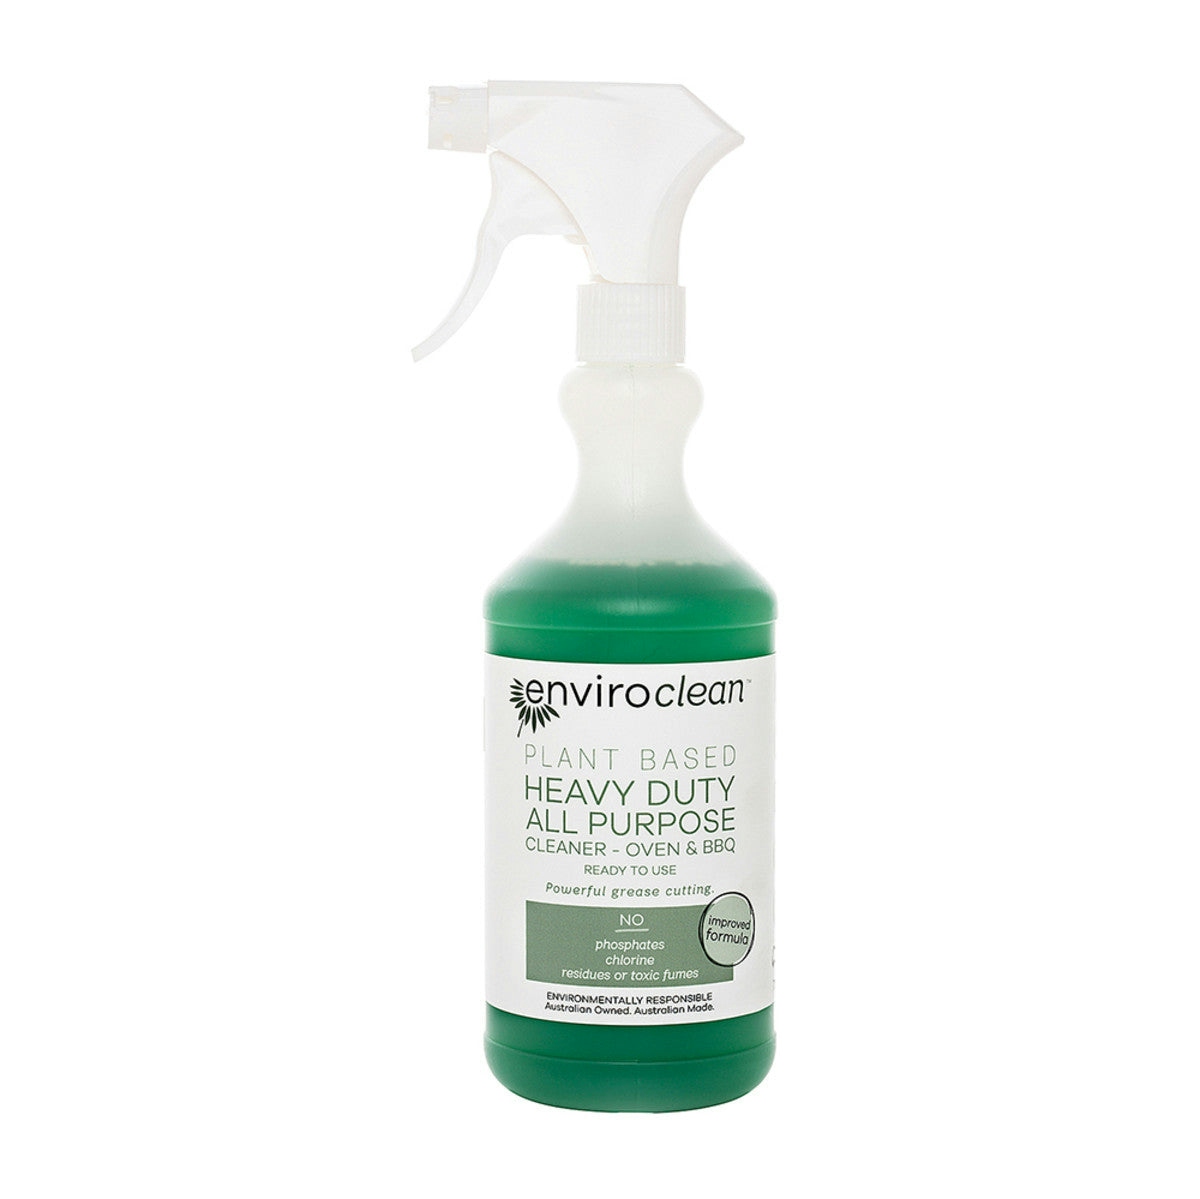 image of EnviroClean Plant Based Heavy Duty All Purpose Cleaner - Oven & BBQ Spray 750ml on white background